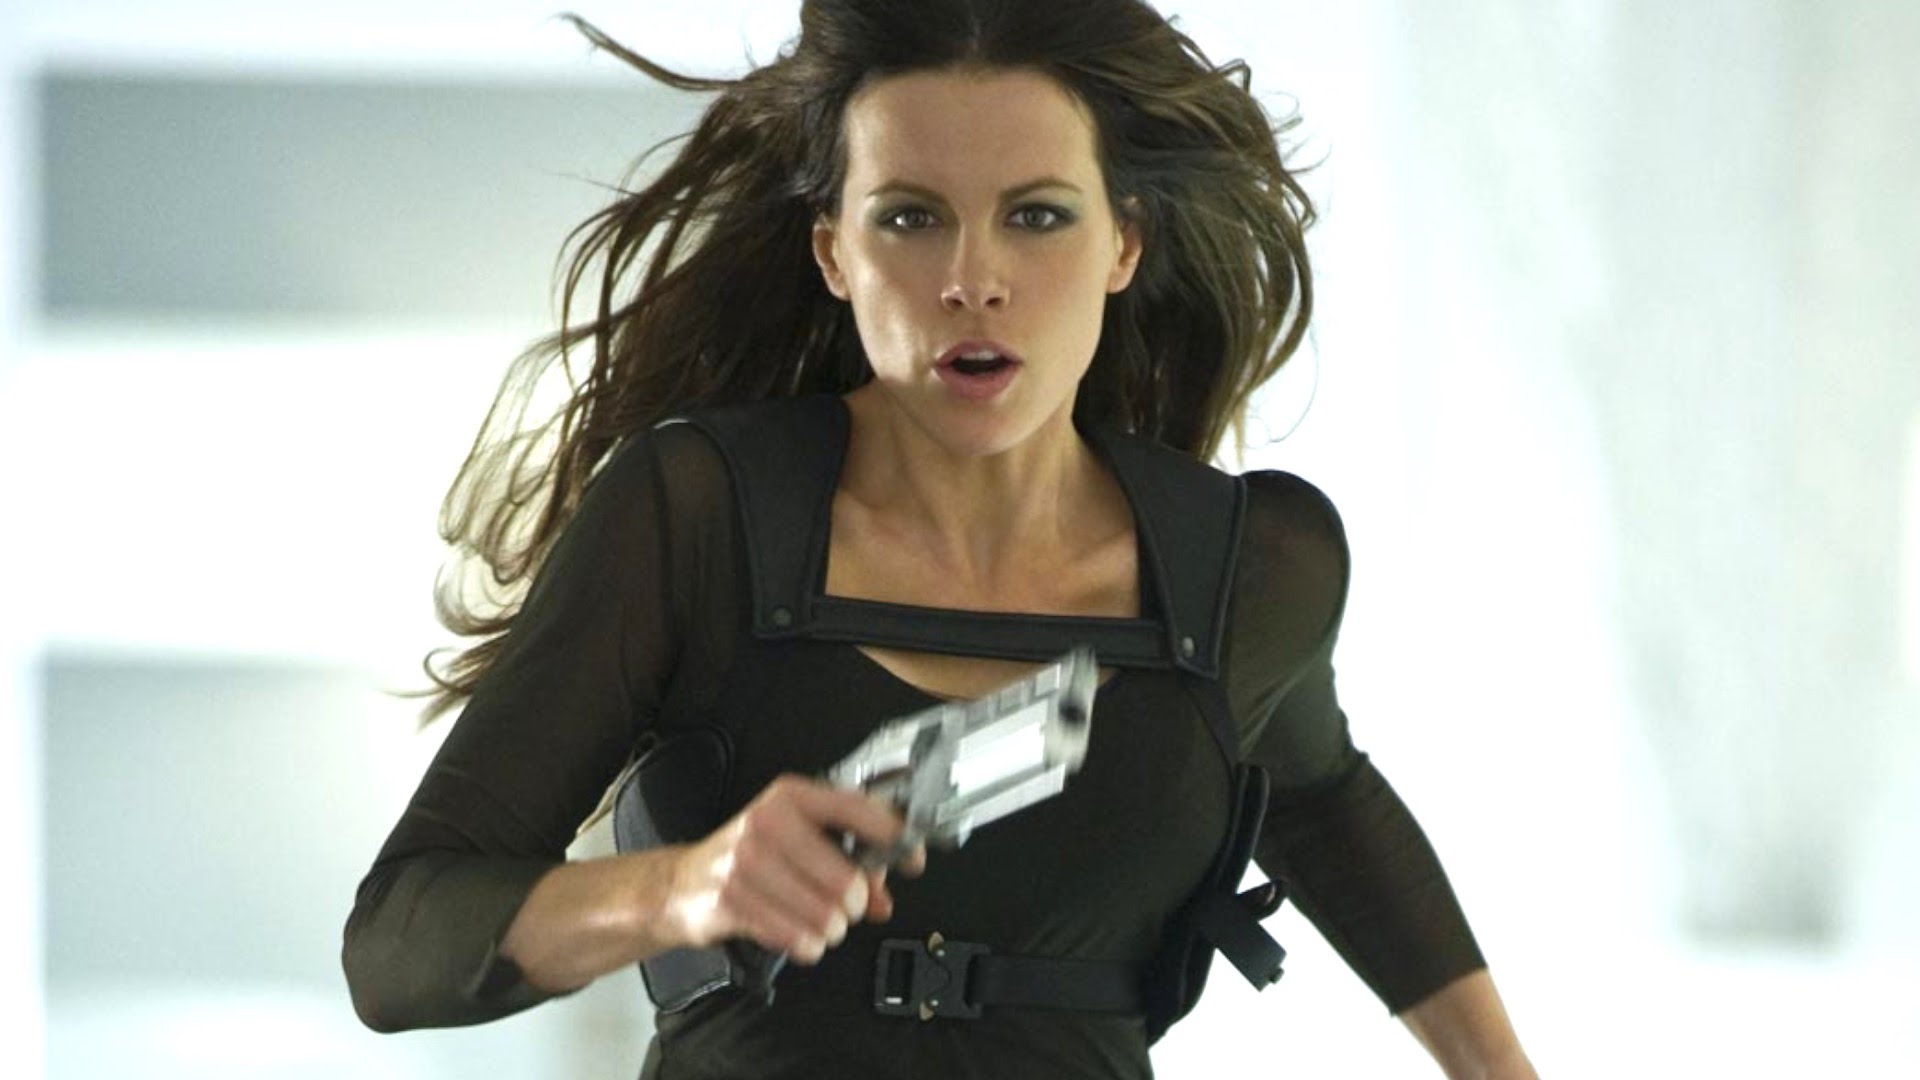 Top 10 Actresses Who Could Play James Bond The ultimate masculine James Bon...